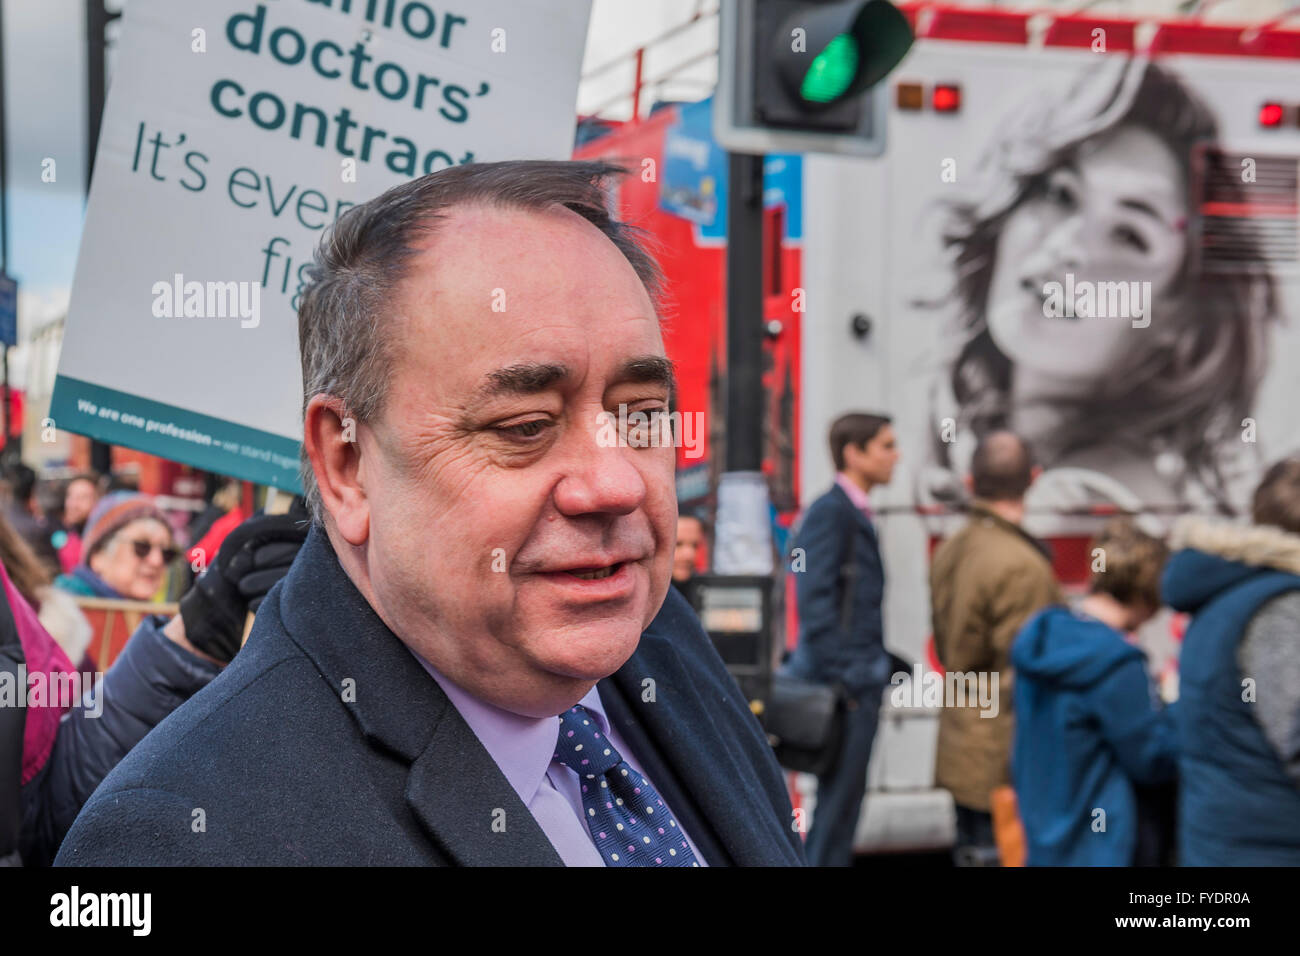 London, UK. 26th April, 2016. Alex Salmond, SNP MP, talks to doctors on his way to an appearanc eon the daily politics show - The picket line at St Thomas' Hospital. Junior Doctors stage a 7 day all out strike action, this time imncluding accident and emergency coverage. They are striking against the new contracts due to be imposed by the Governemnt and health minister Jeremy Hunt. They are supported by the British Medical Association. Credit:  Guy Bell/Alamy Live News Stock Photo